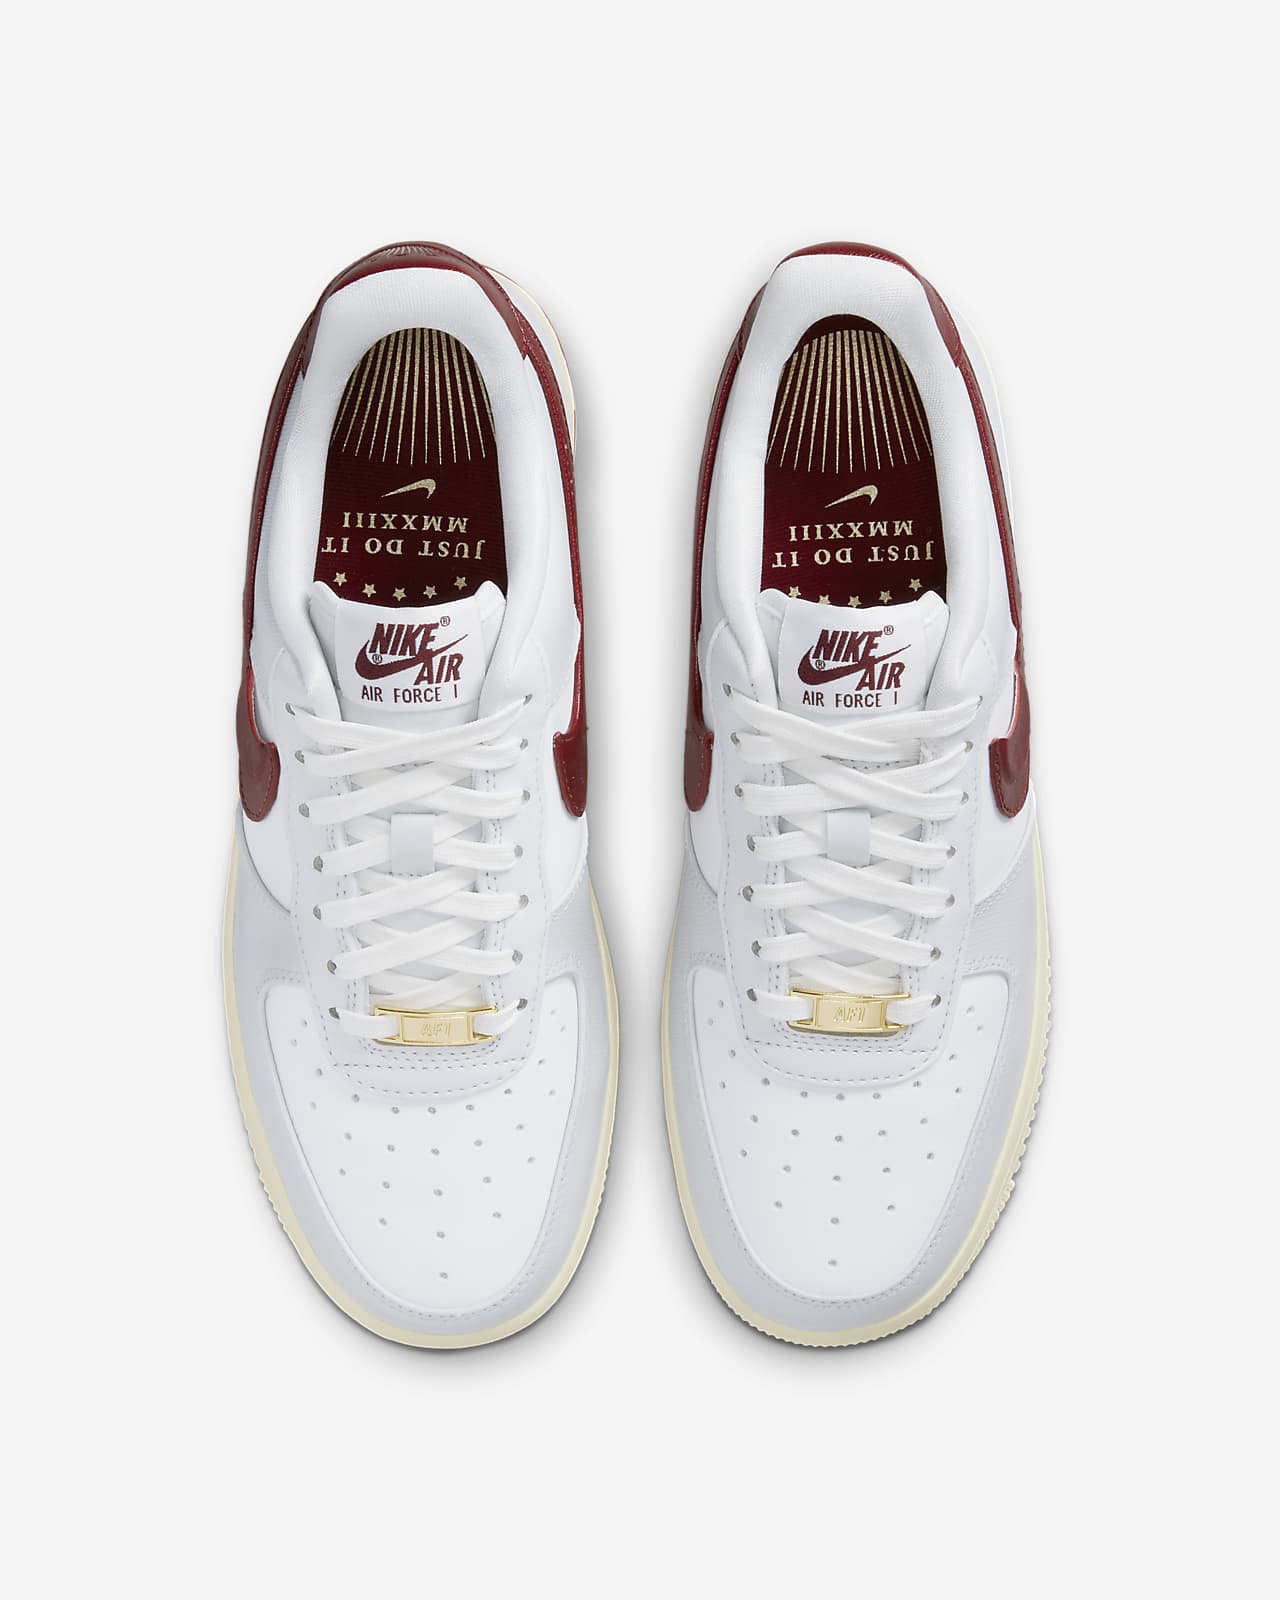 Nike Air Force 1 ’07 SE Women’s Shoes